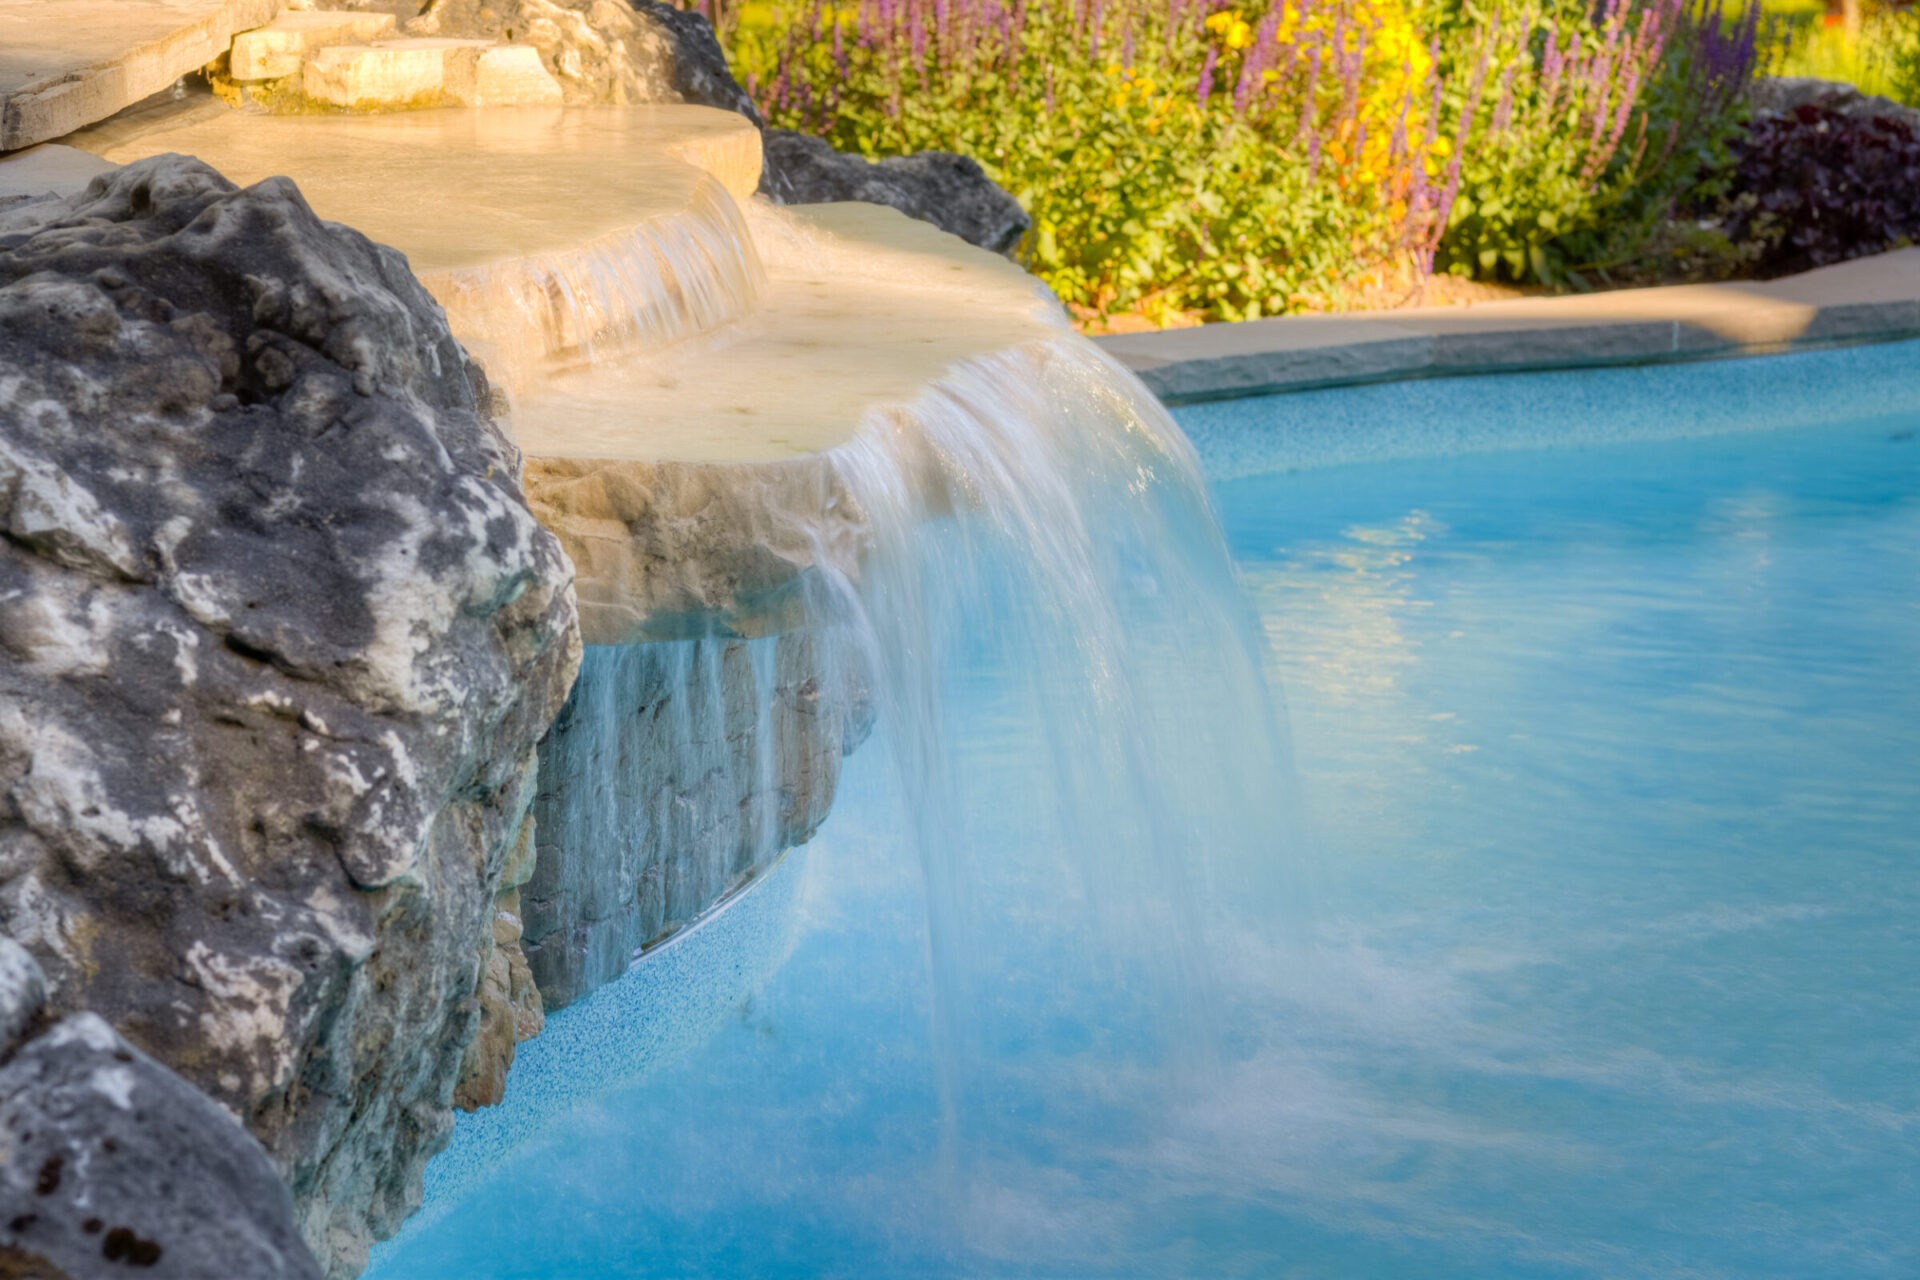 A serene waterfall flows from artificial stone into a clear, tranquil pool, surrounded by lush flowers in a landscaped garden at golden hour.